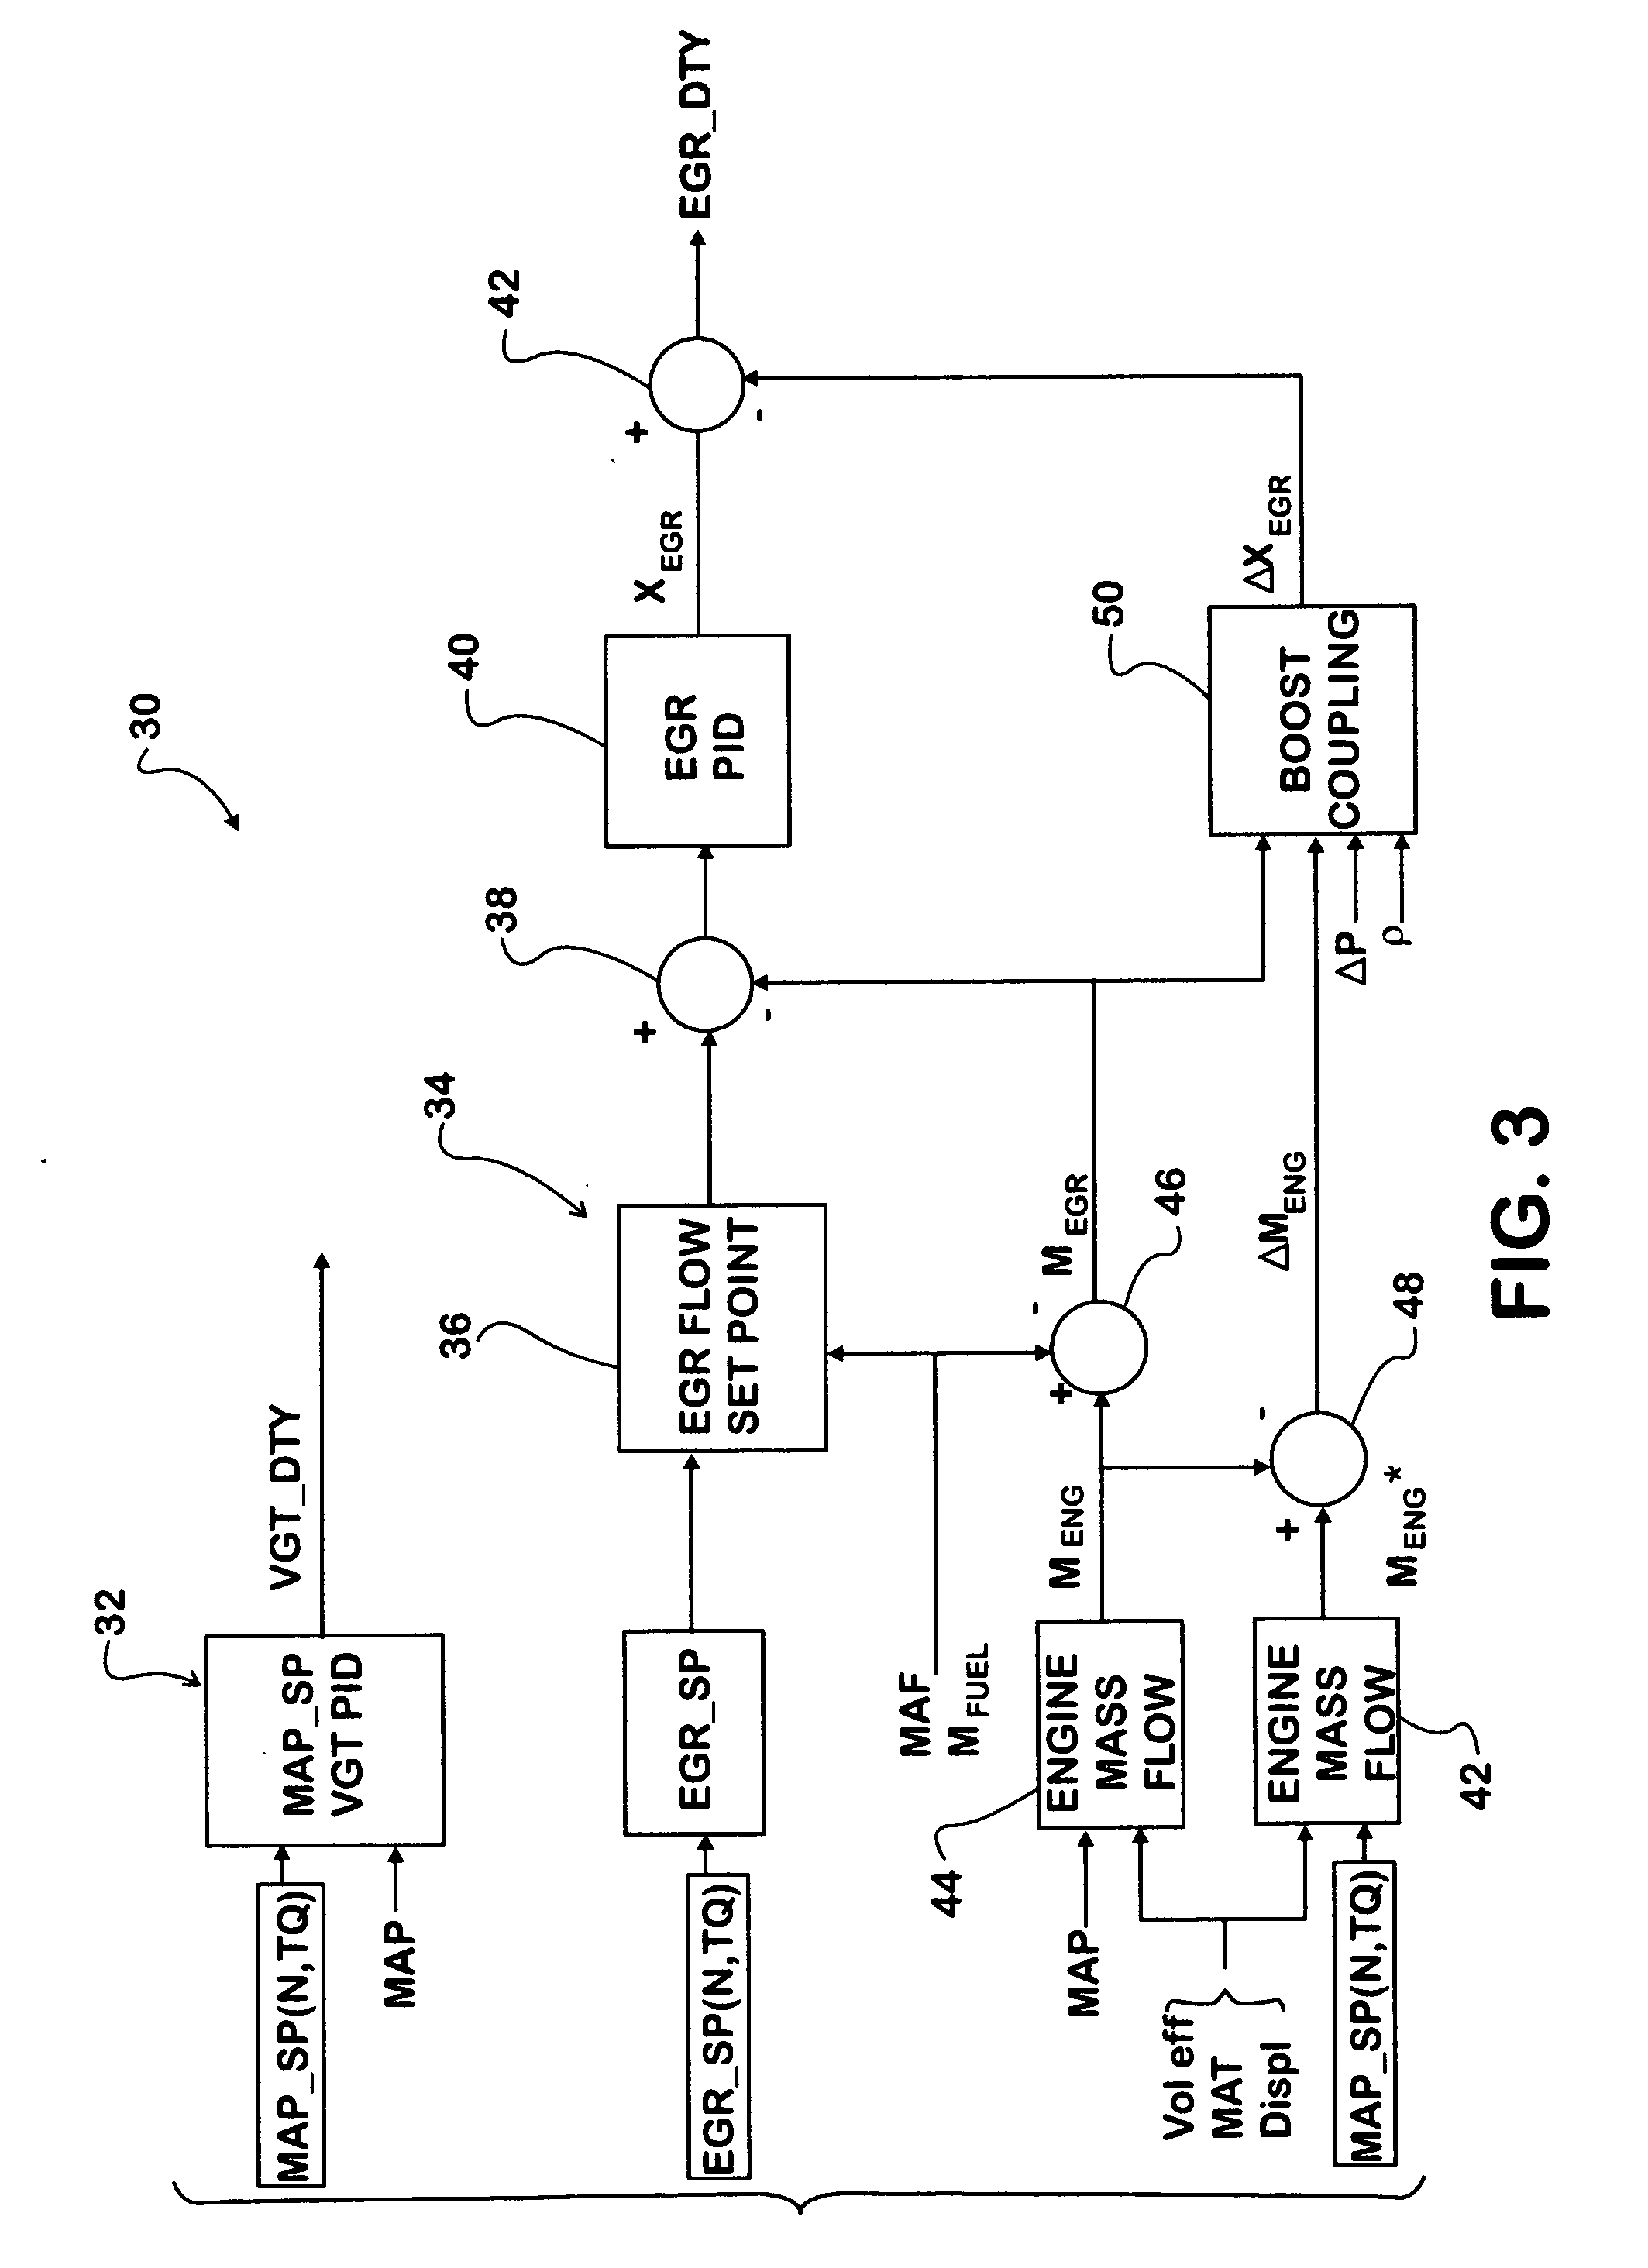 Strategy for control of recirculated exhaust gas to null turbocharger boost error